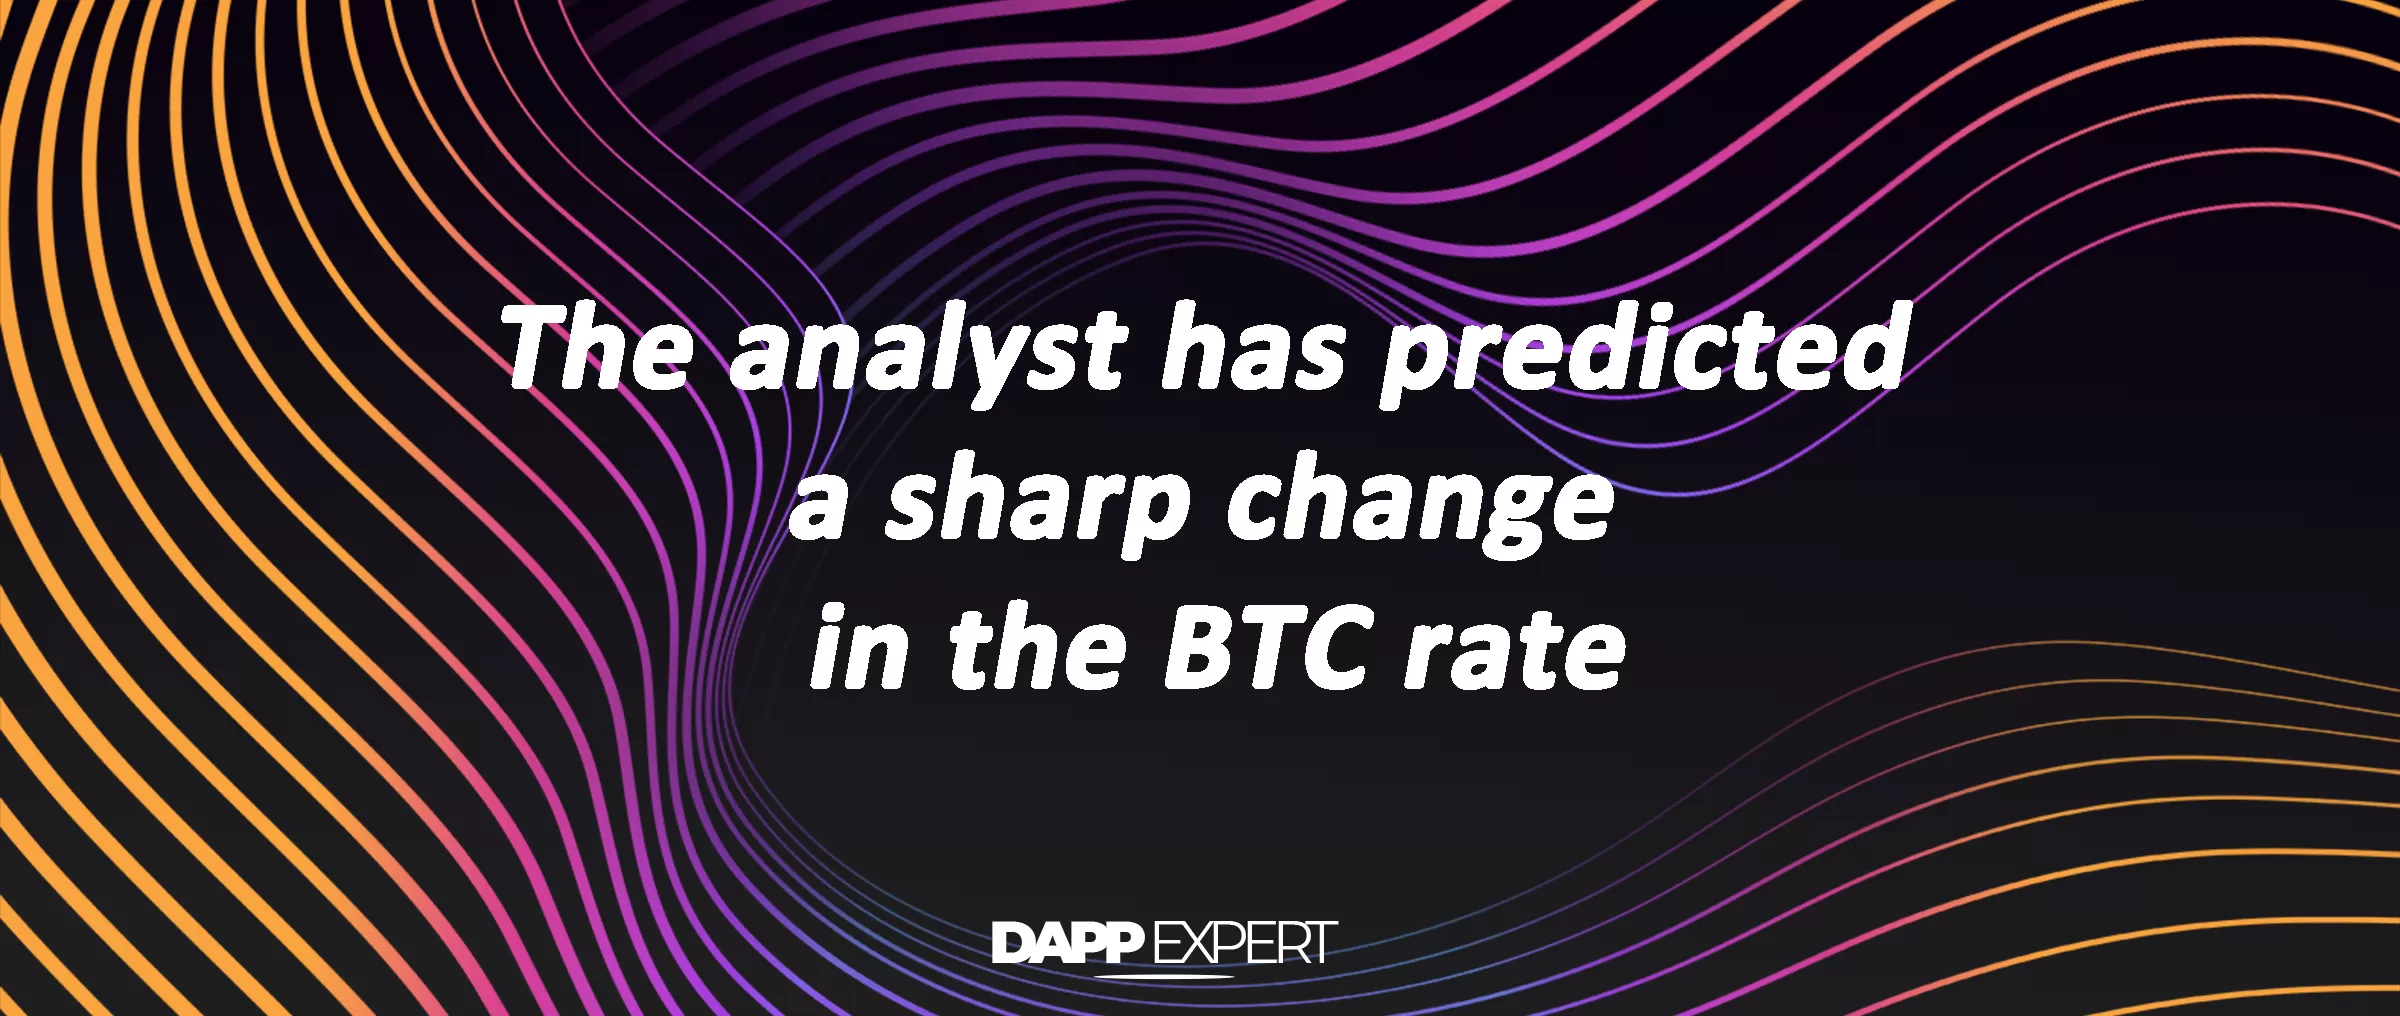 The analyst has predicted a sharp change in the BTC rate